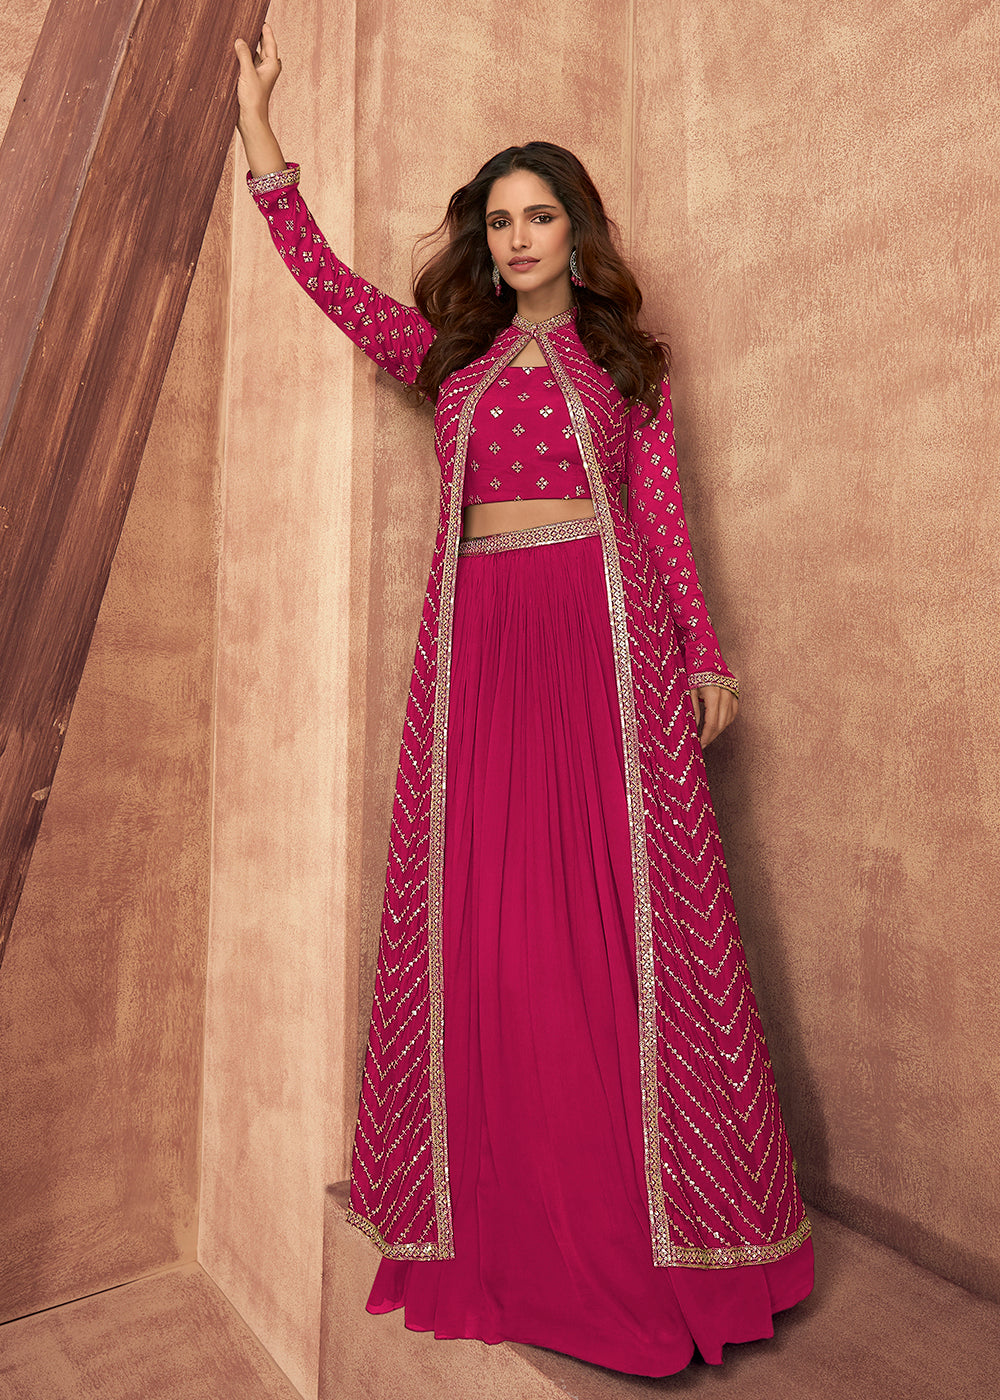 Shop Now Hot Pink Dola Silk Party Wear Lehenga Choli with Jacket Online in USA, UK, Canada & Worldwide at Empress Clothing.